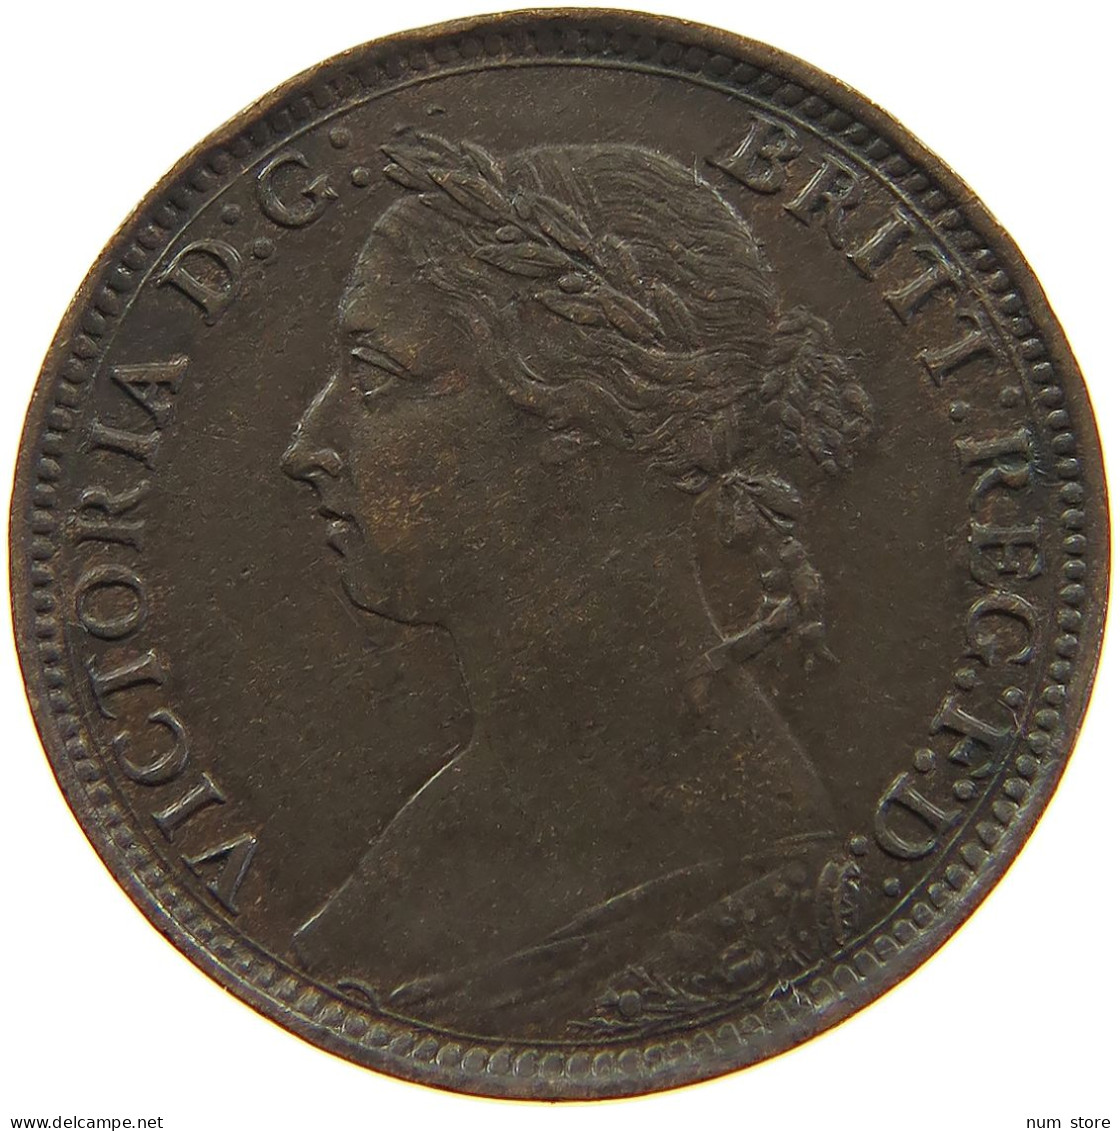 GREAT BRITAIN FARTHING 1886 Victoria 1837-1901 #a011 0773 - B. 1 Farthing